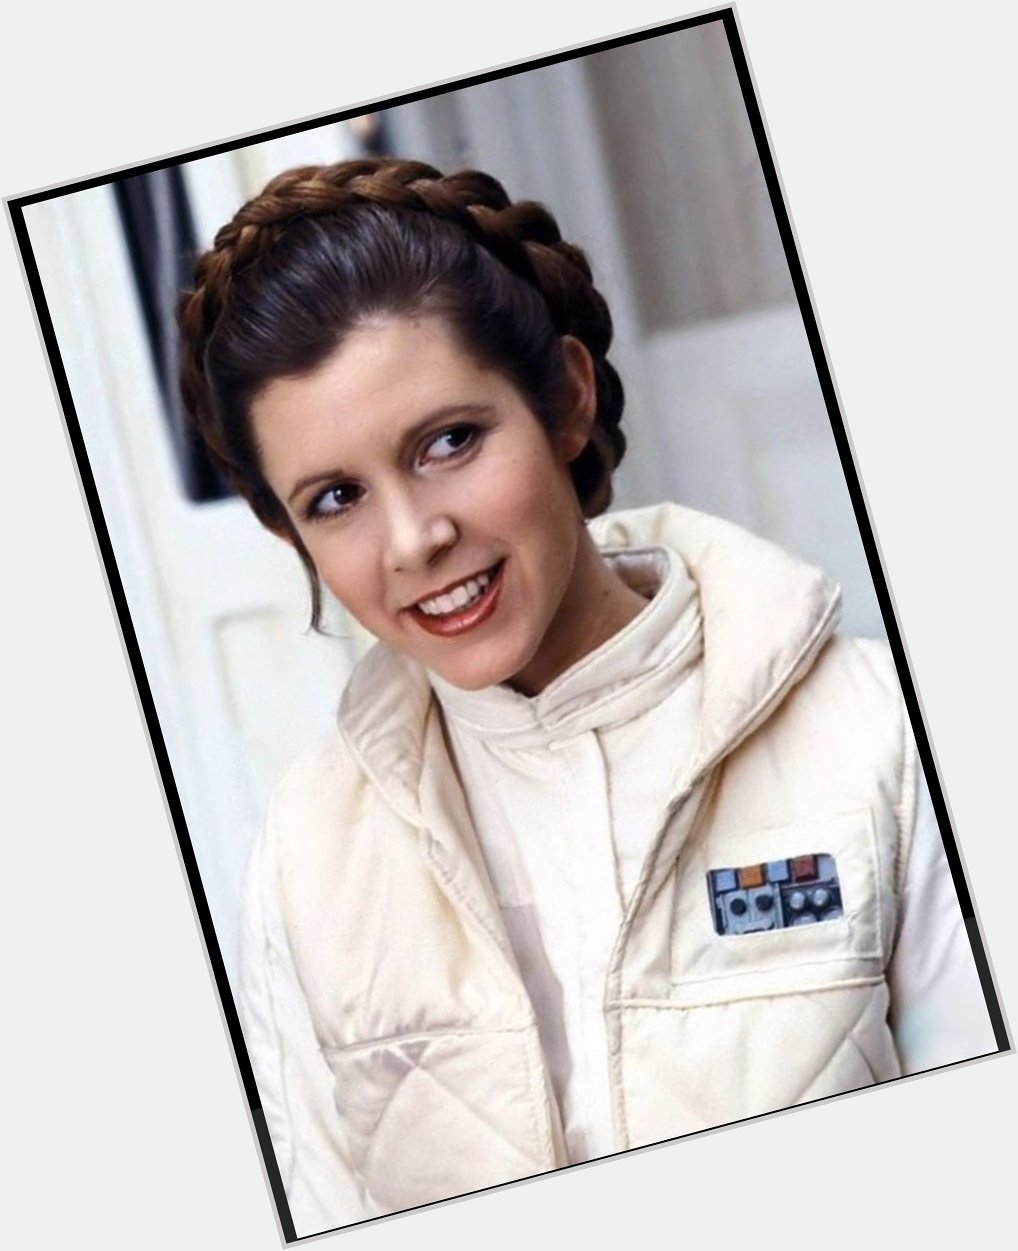 Happy birthday to the galactic princess Carrie Fisher 